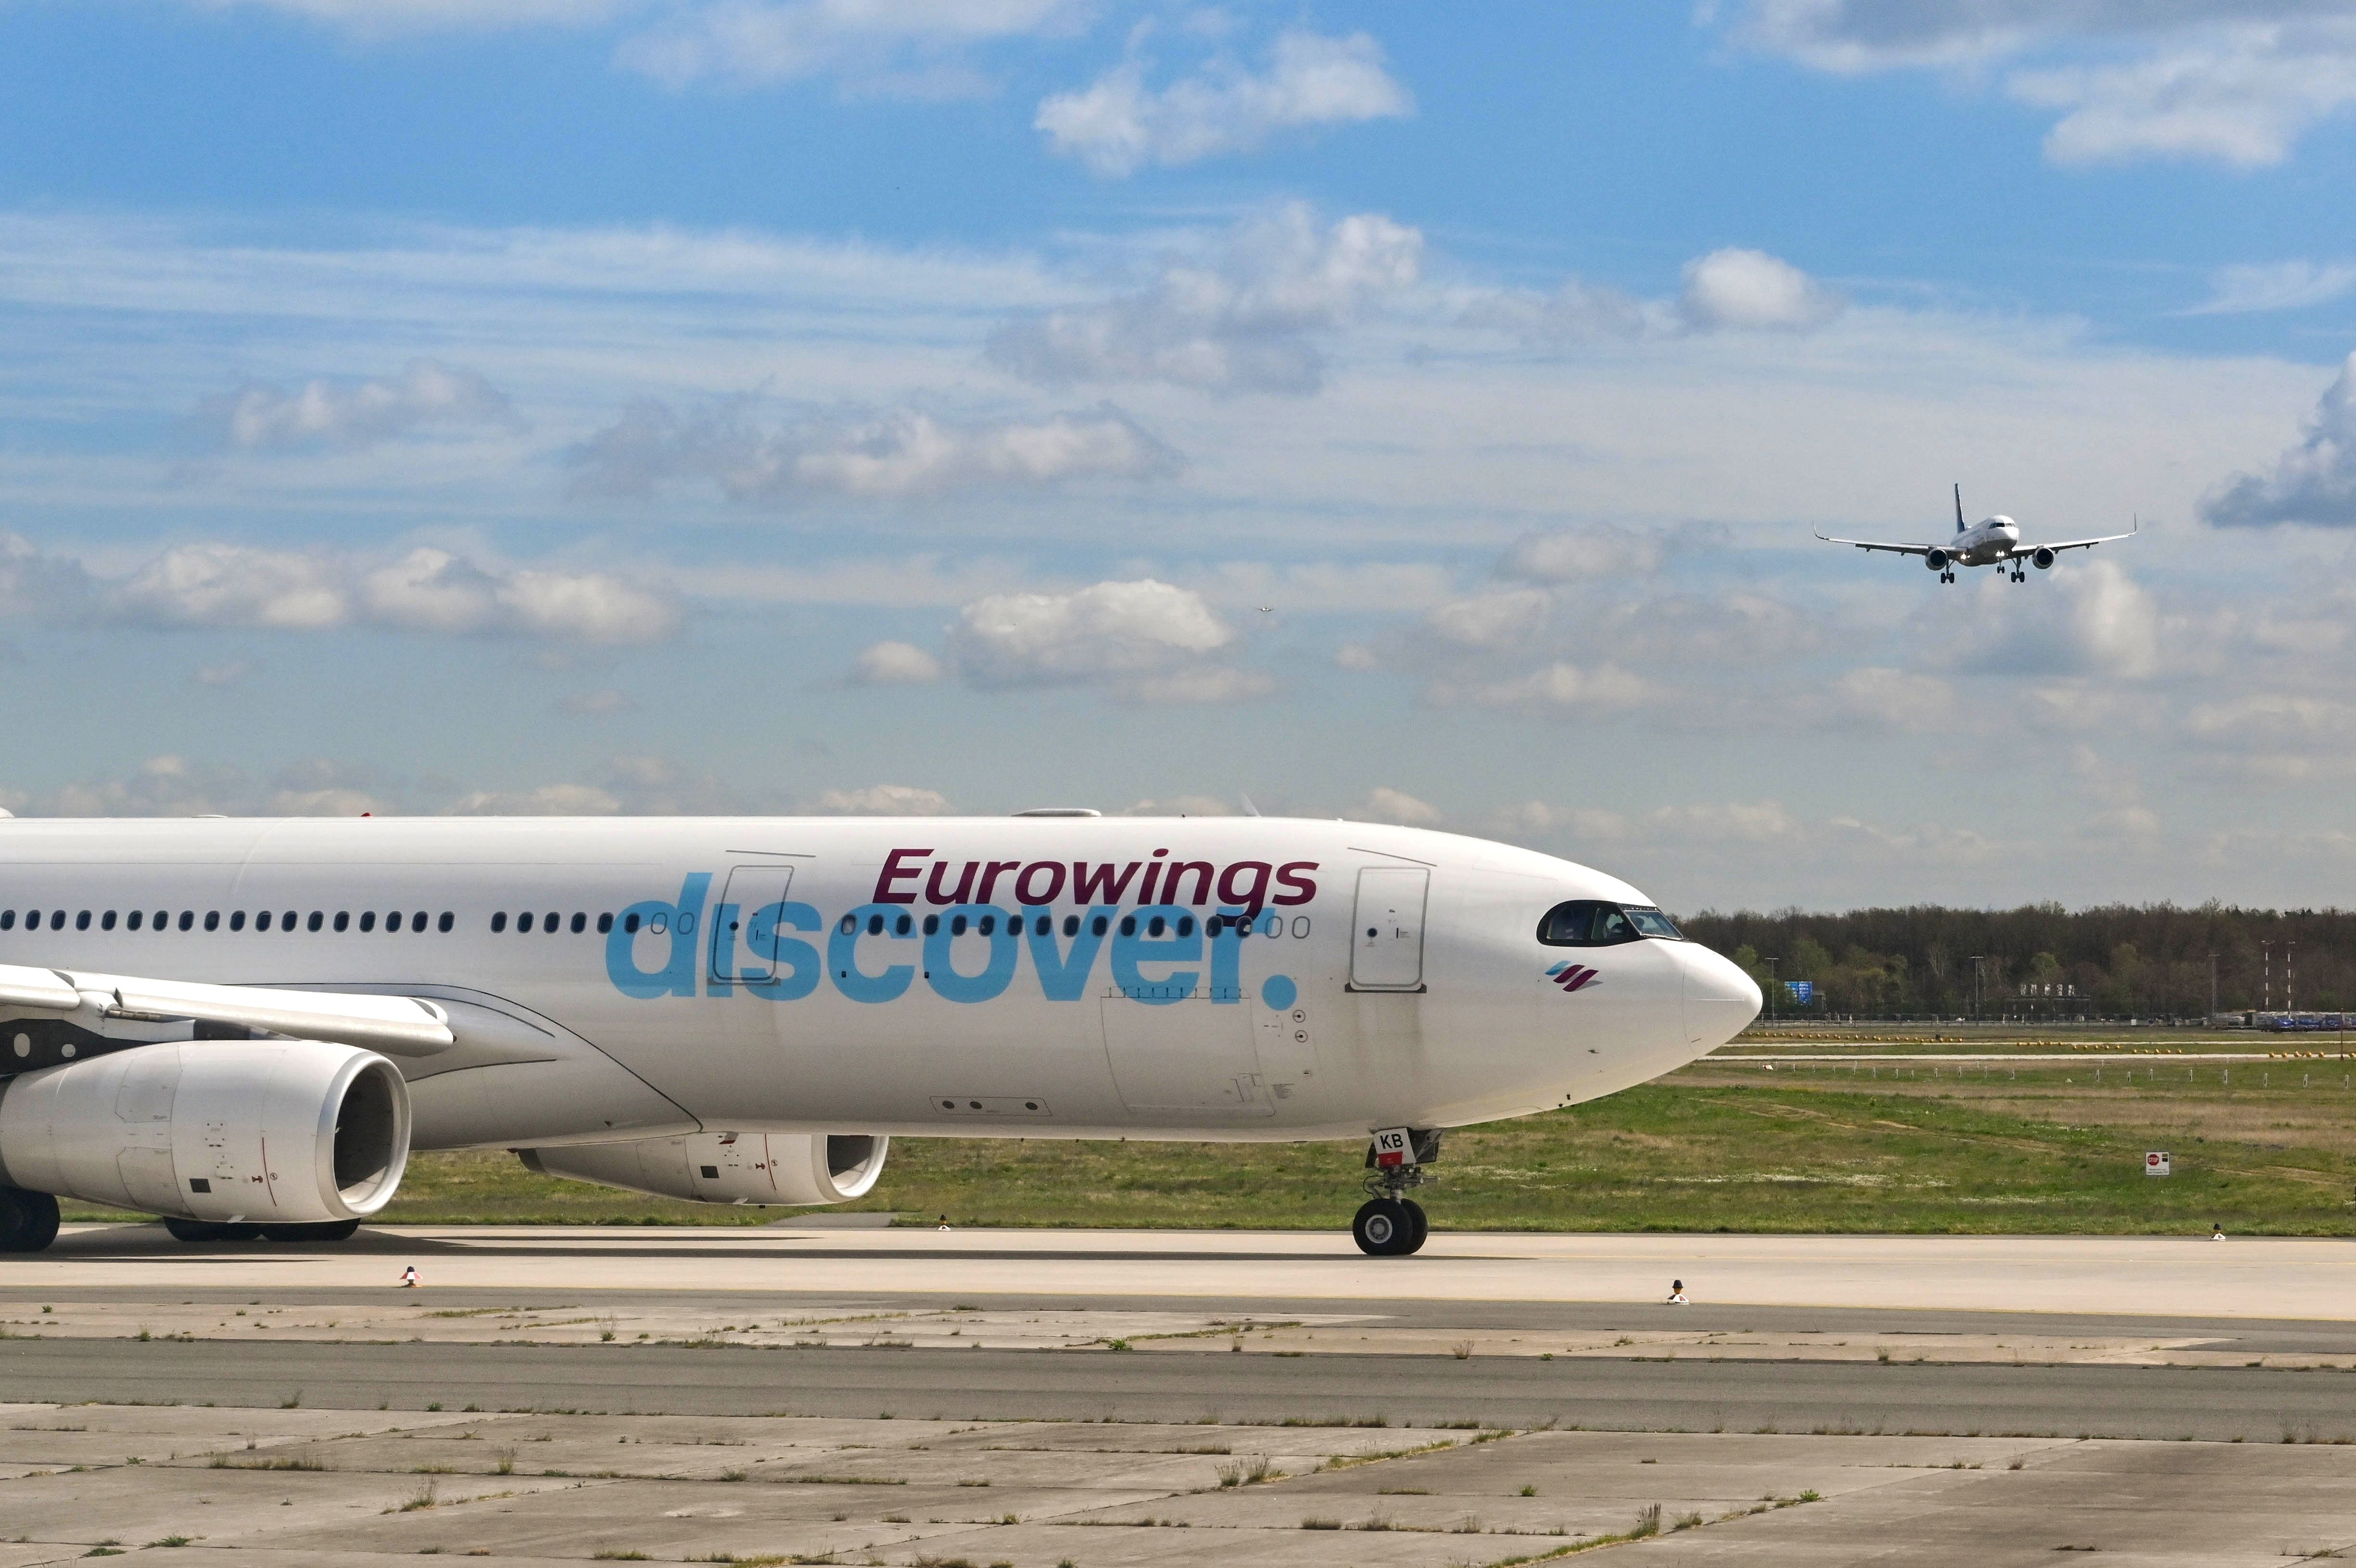 A Eurowings discover aircraft prior to taking off.